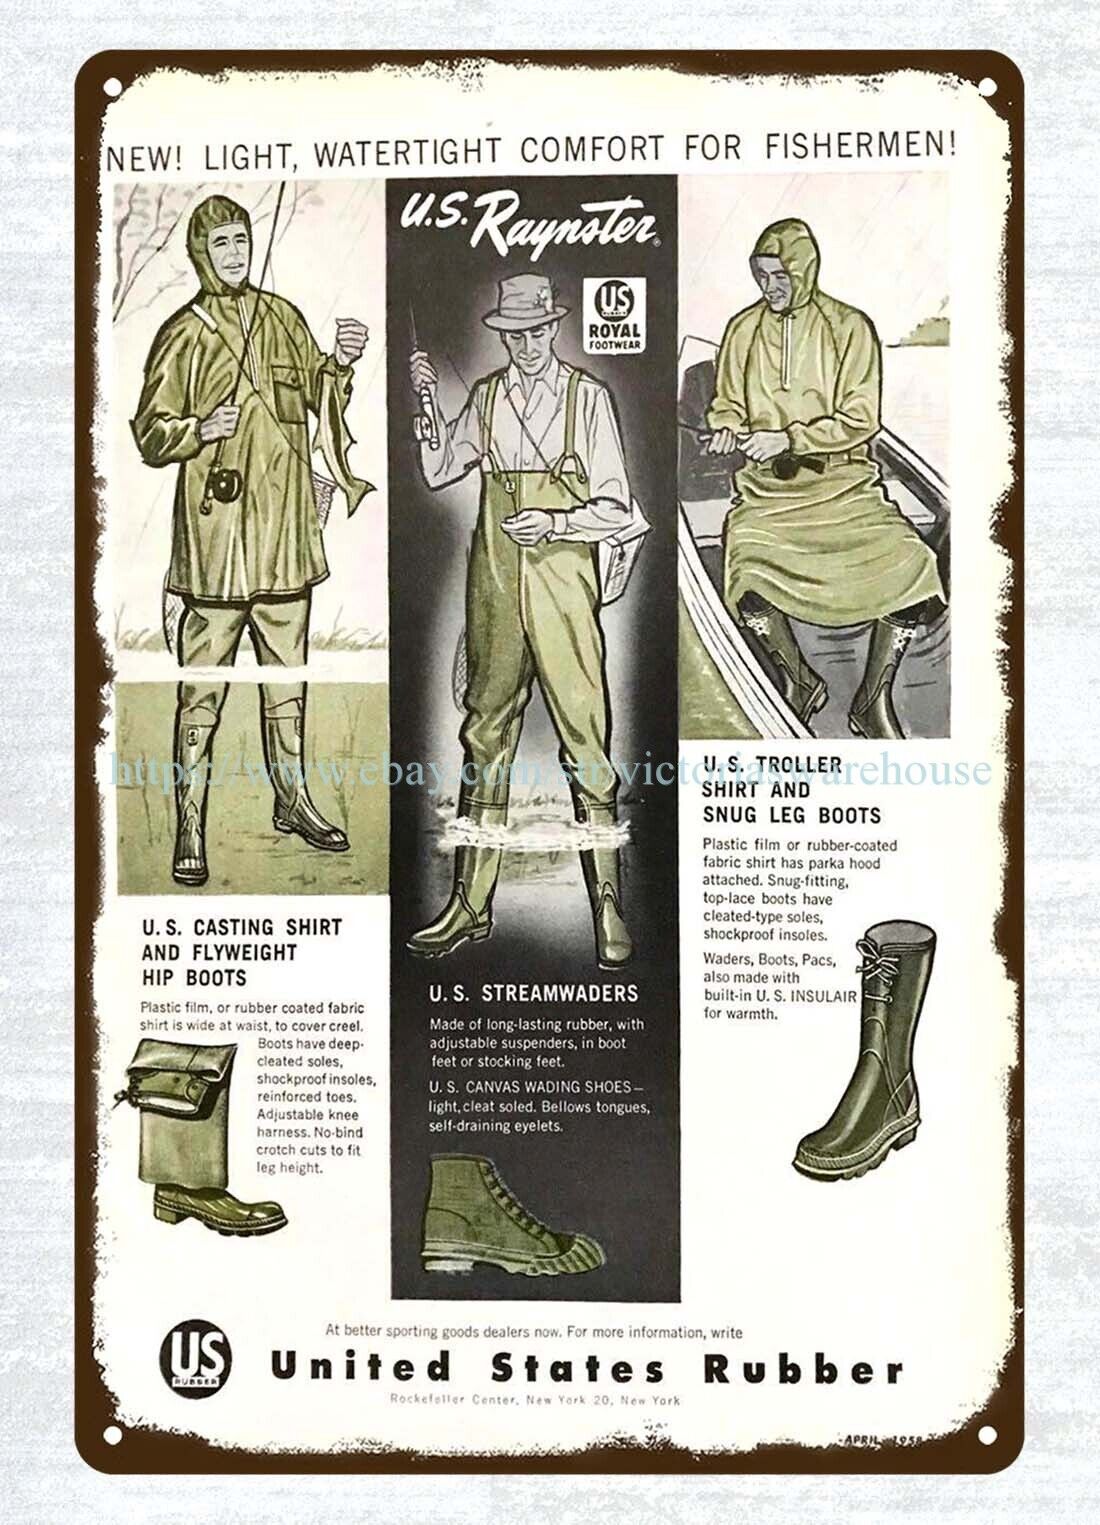 1958 US Rubber Fishing Outdoor Gear Waders Boots Shirt metal tin sign